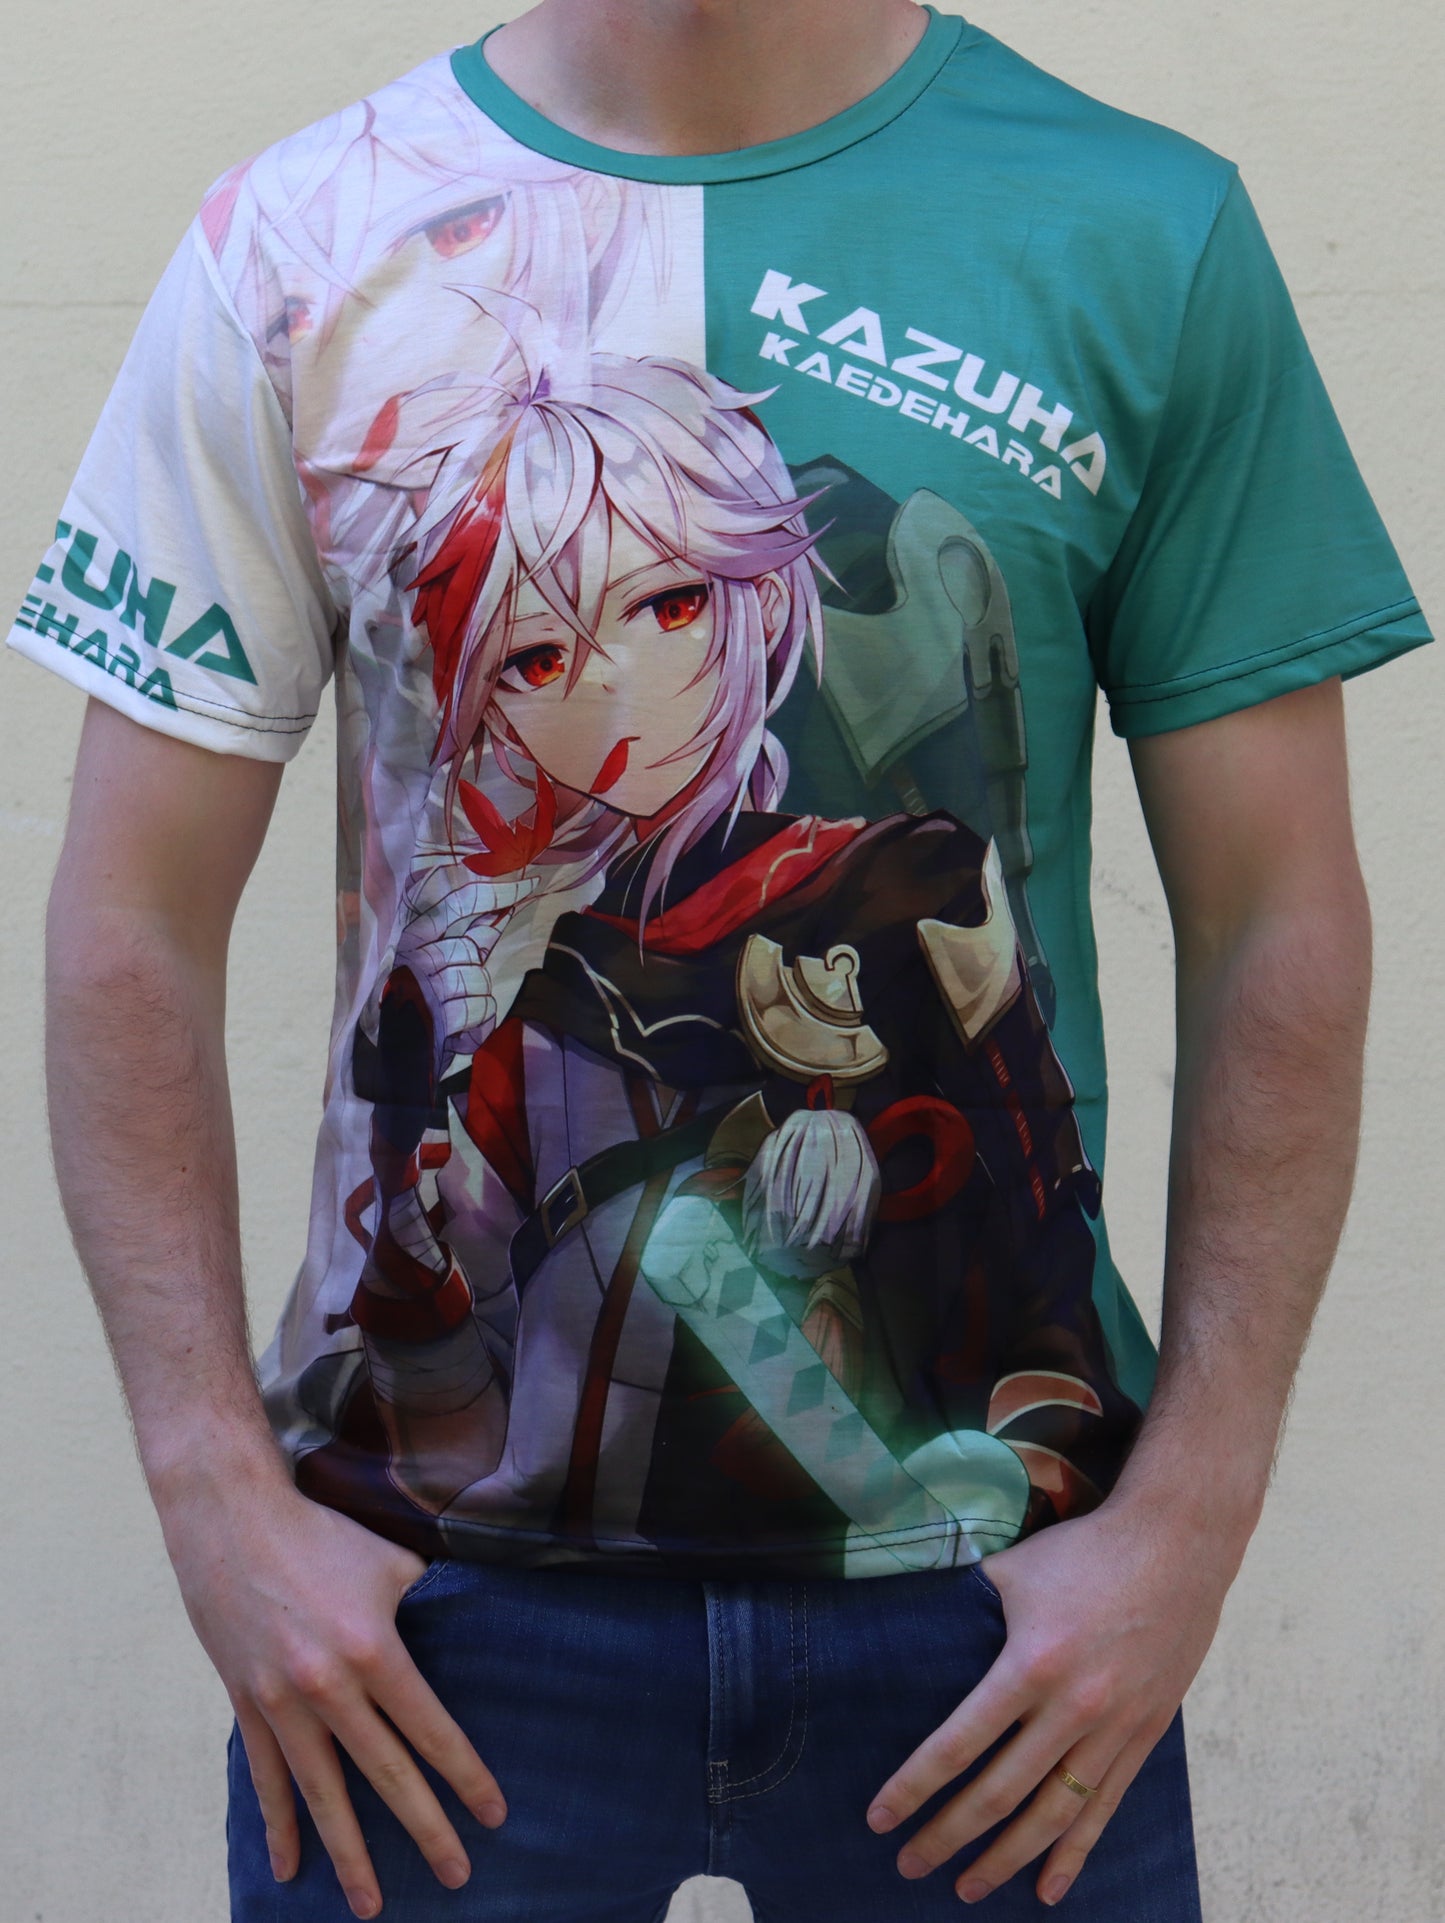 Kazuha T-Shirt(Price Does Not Include Shipping)